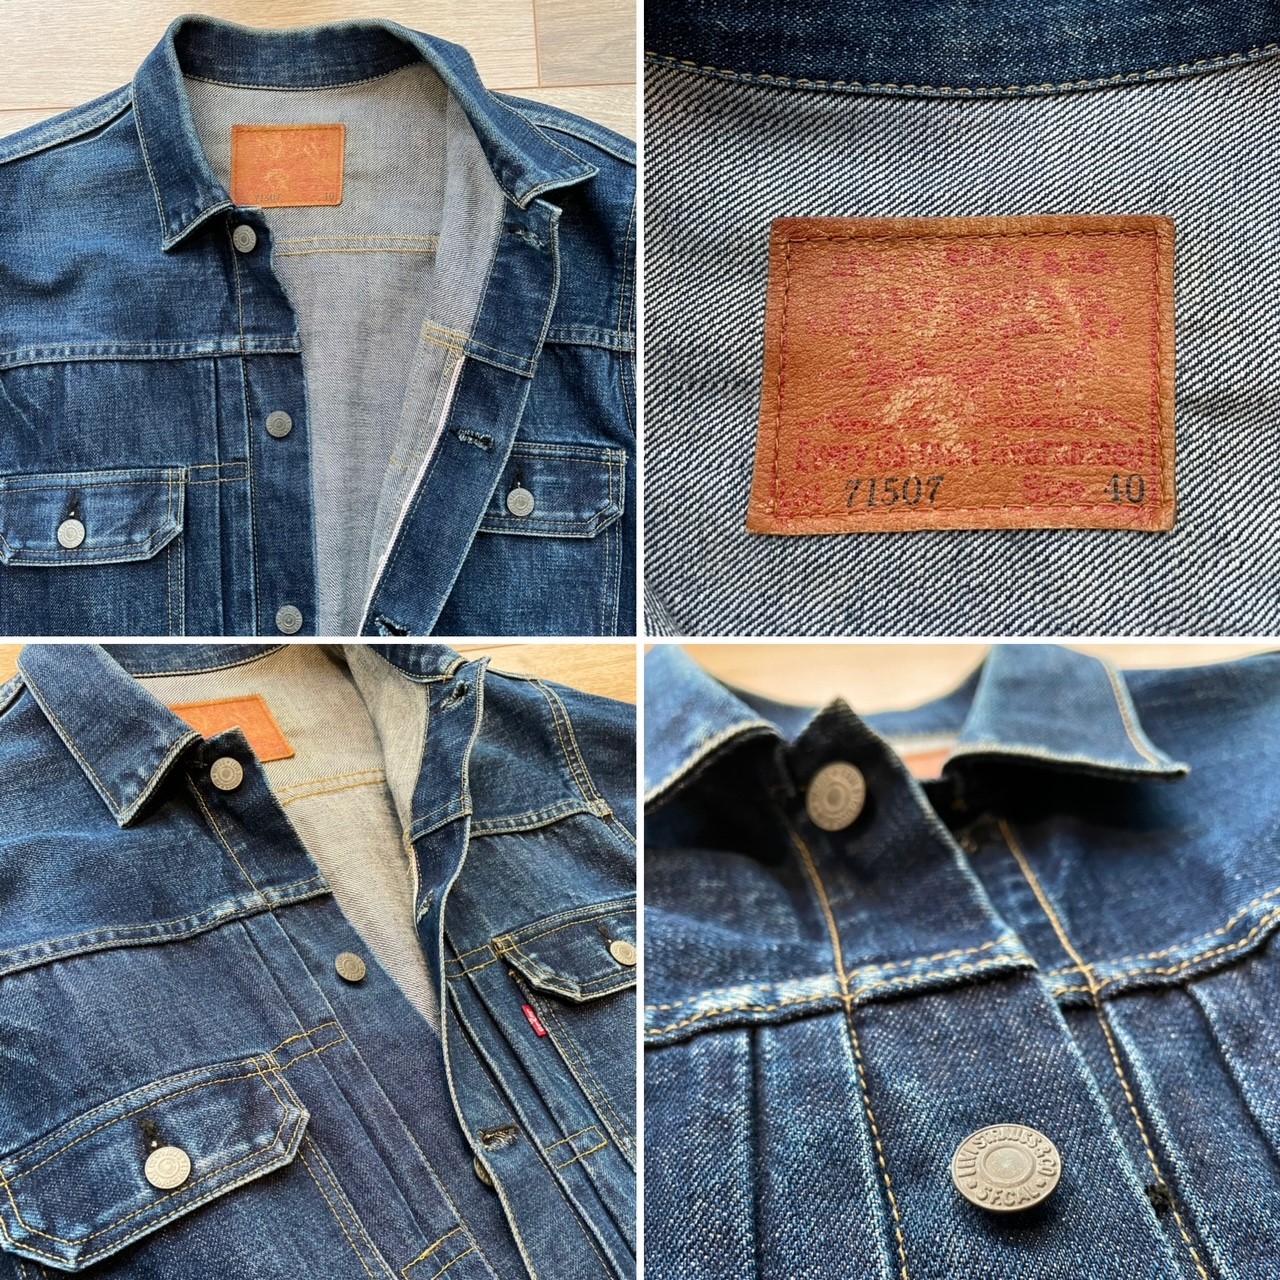 Type II jacket review x3. Denim, Roughout and waxed canvas/leather | The  Fedora Lounge